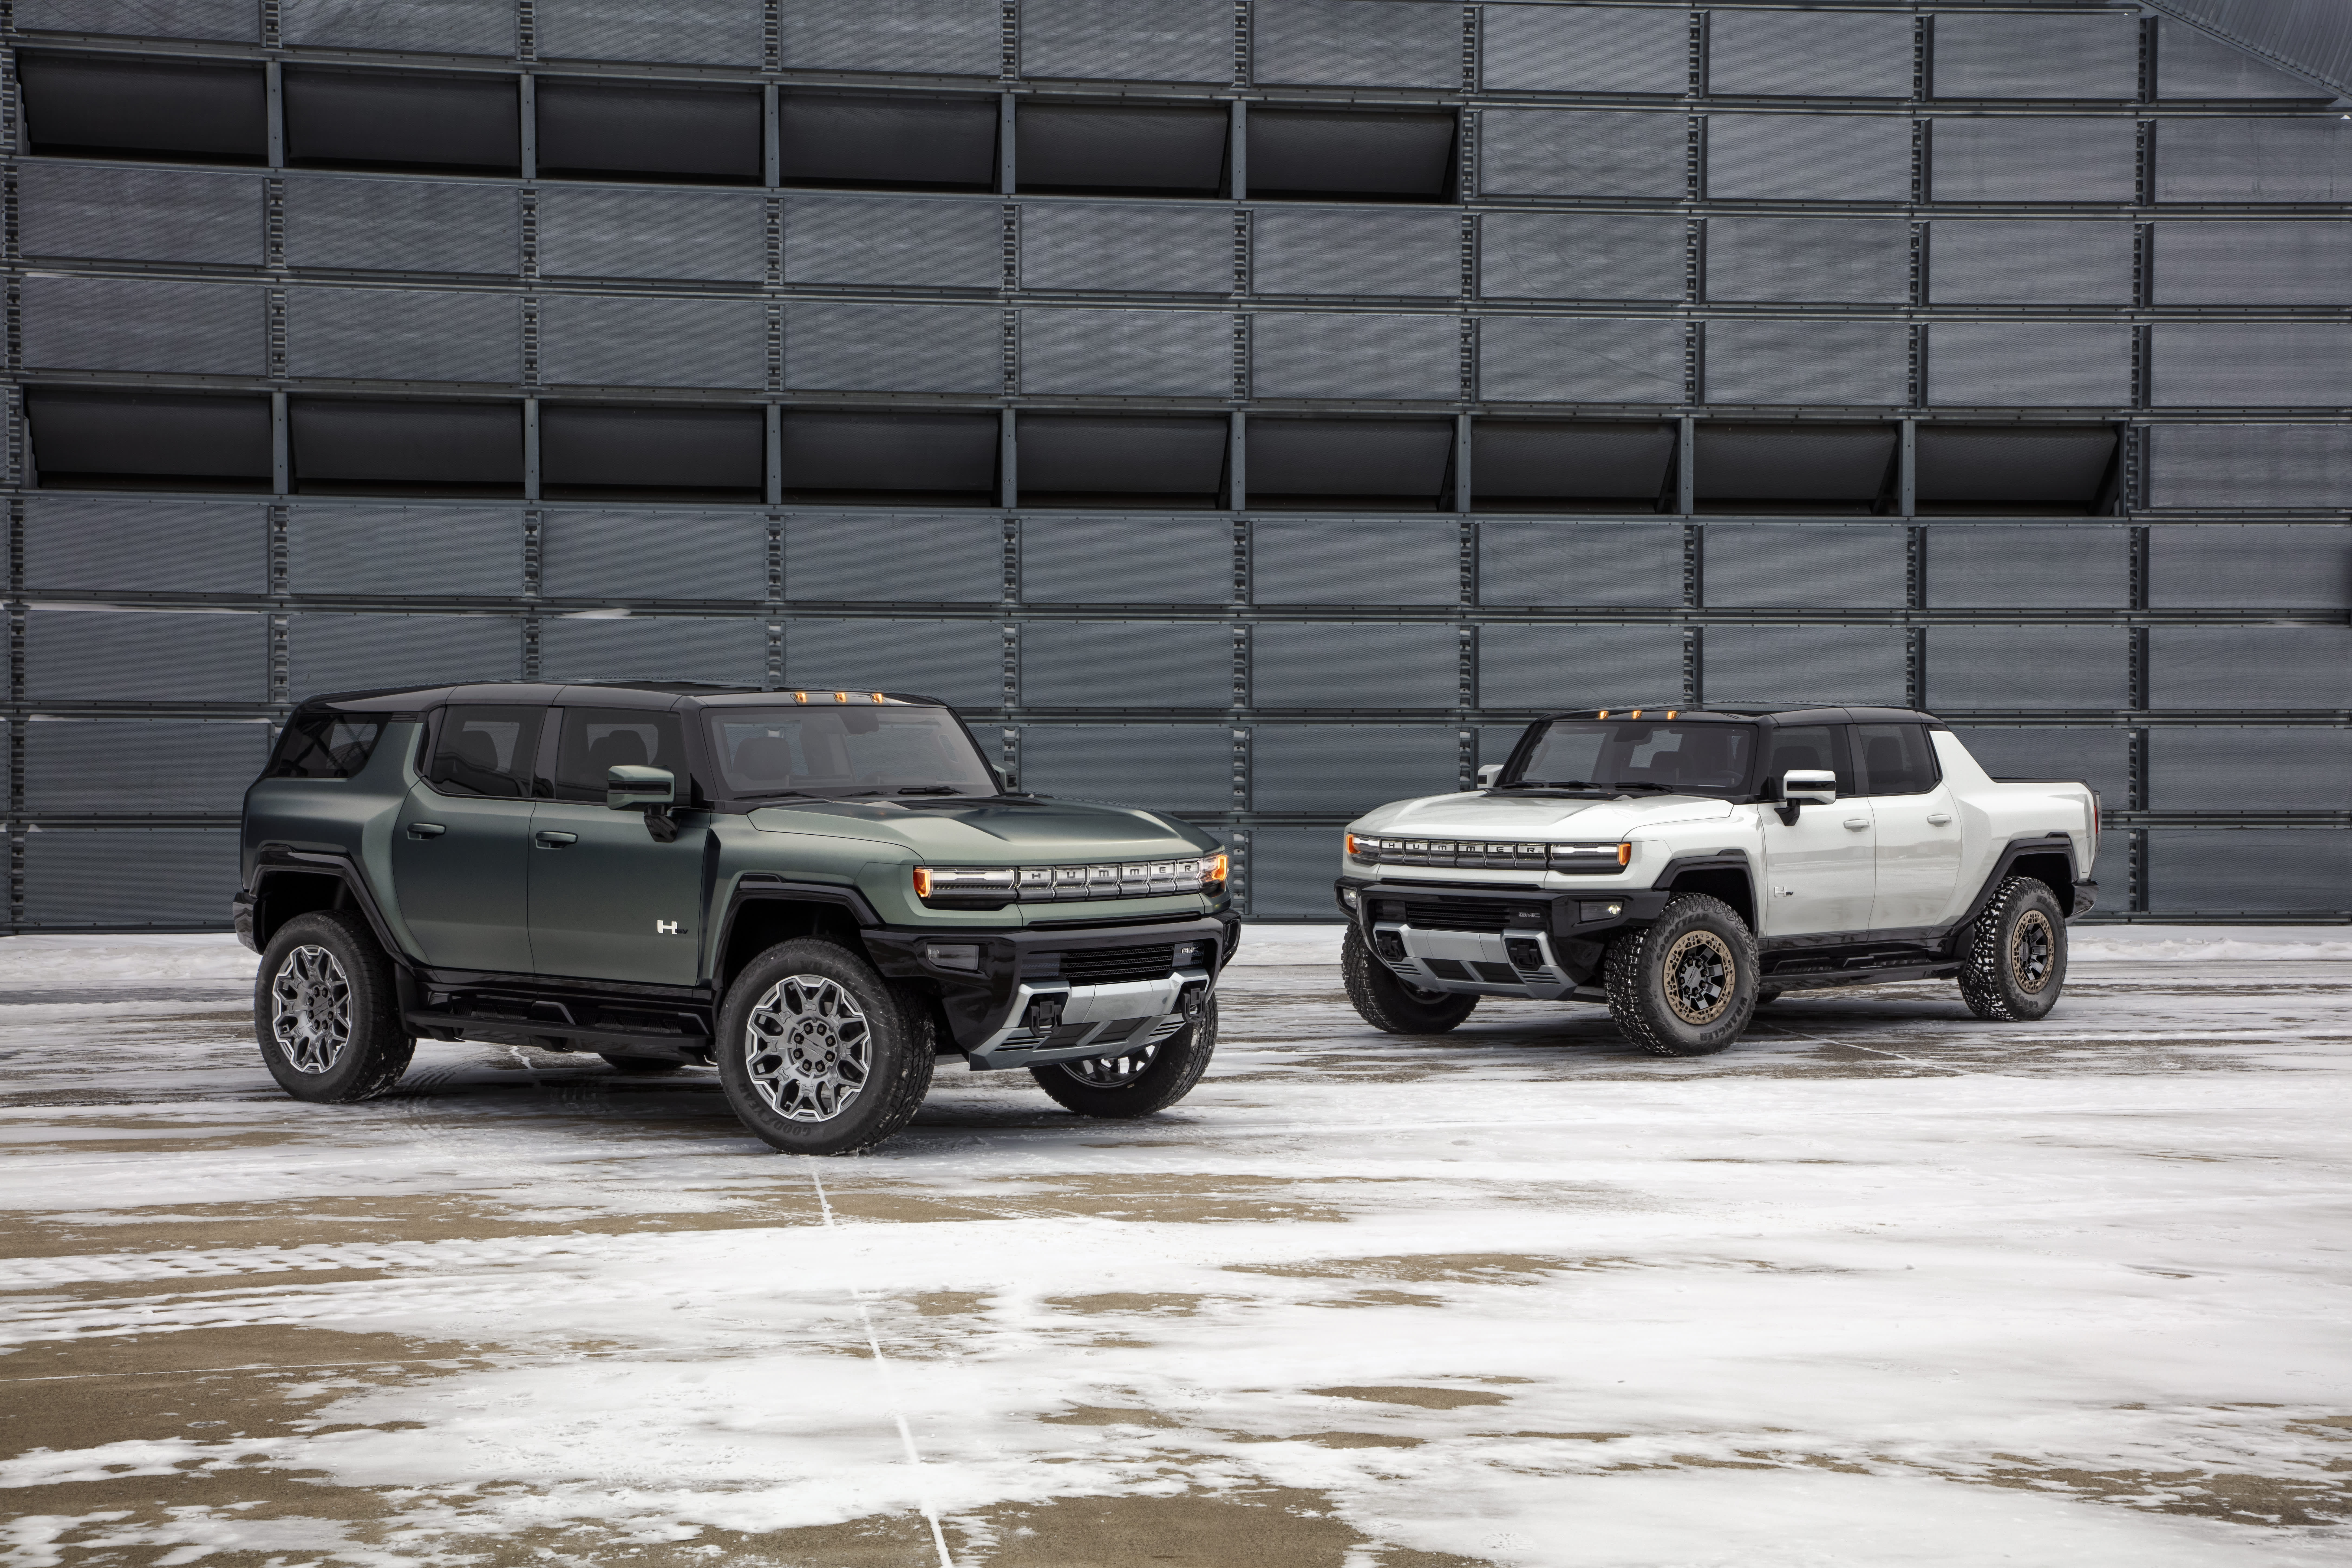 GM unveils Hummer’s electric SUV, which exceeds $ 110,000